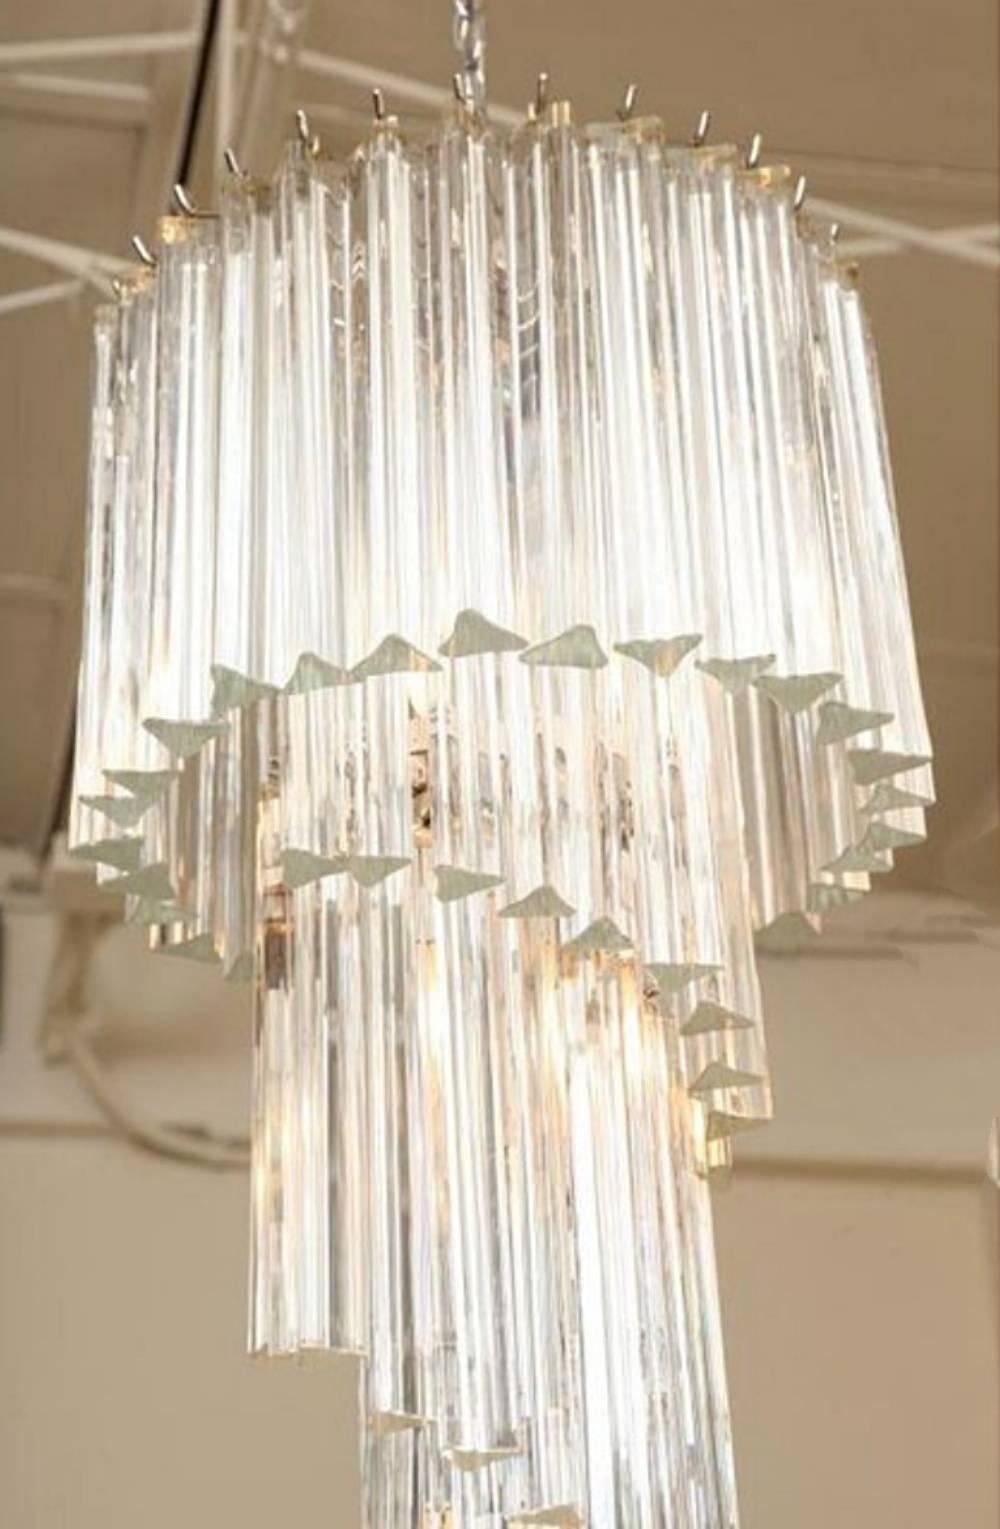 Italian Modern Tiered Prism Venini Nickel & Crystal Chandelier, 1960s In Excellent Condition For Sale In Hollywood, FL